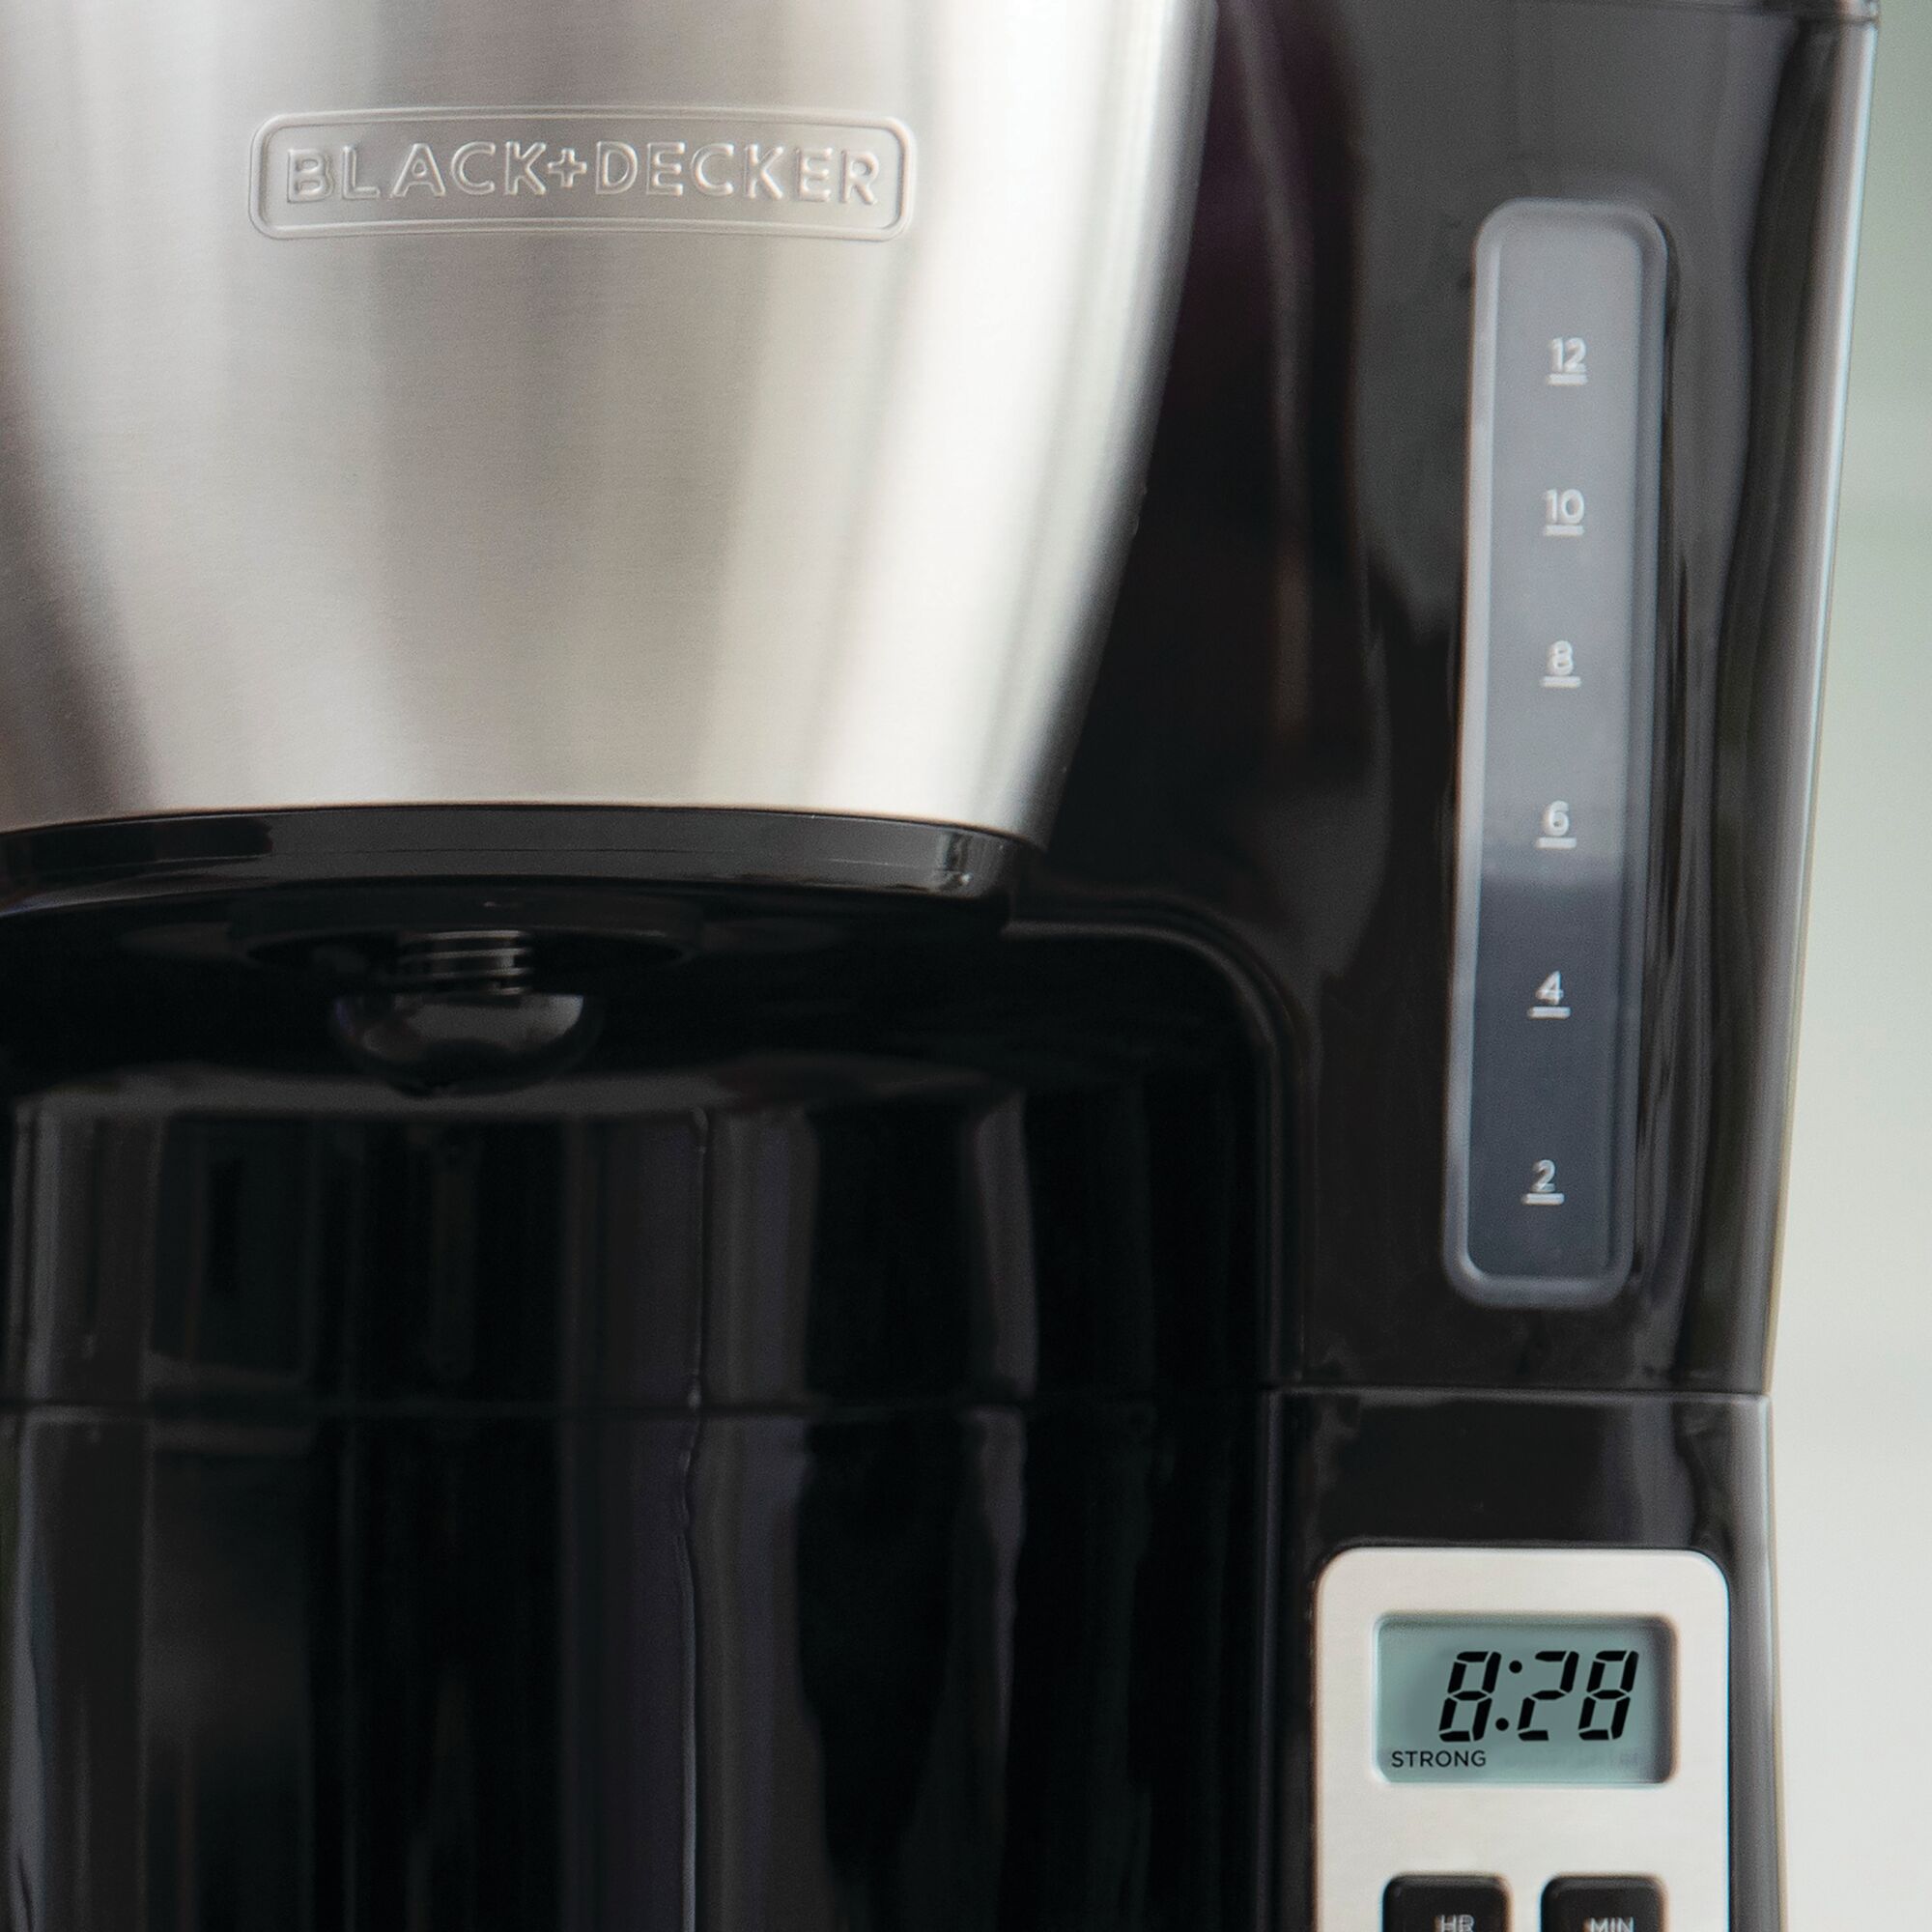 Close-in image of the water level guide and digital display of the BLACK+DECKER coffee maker